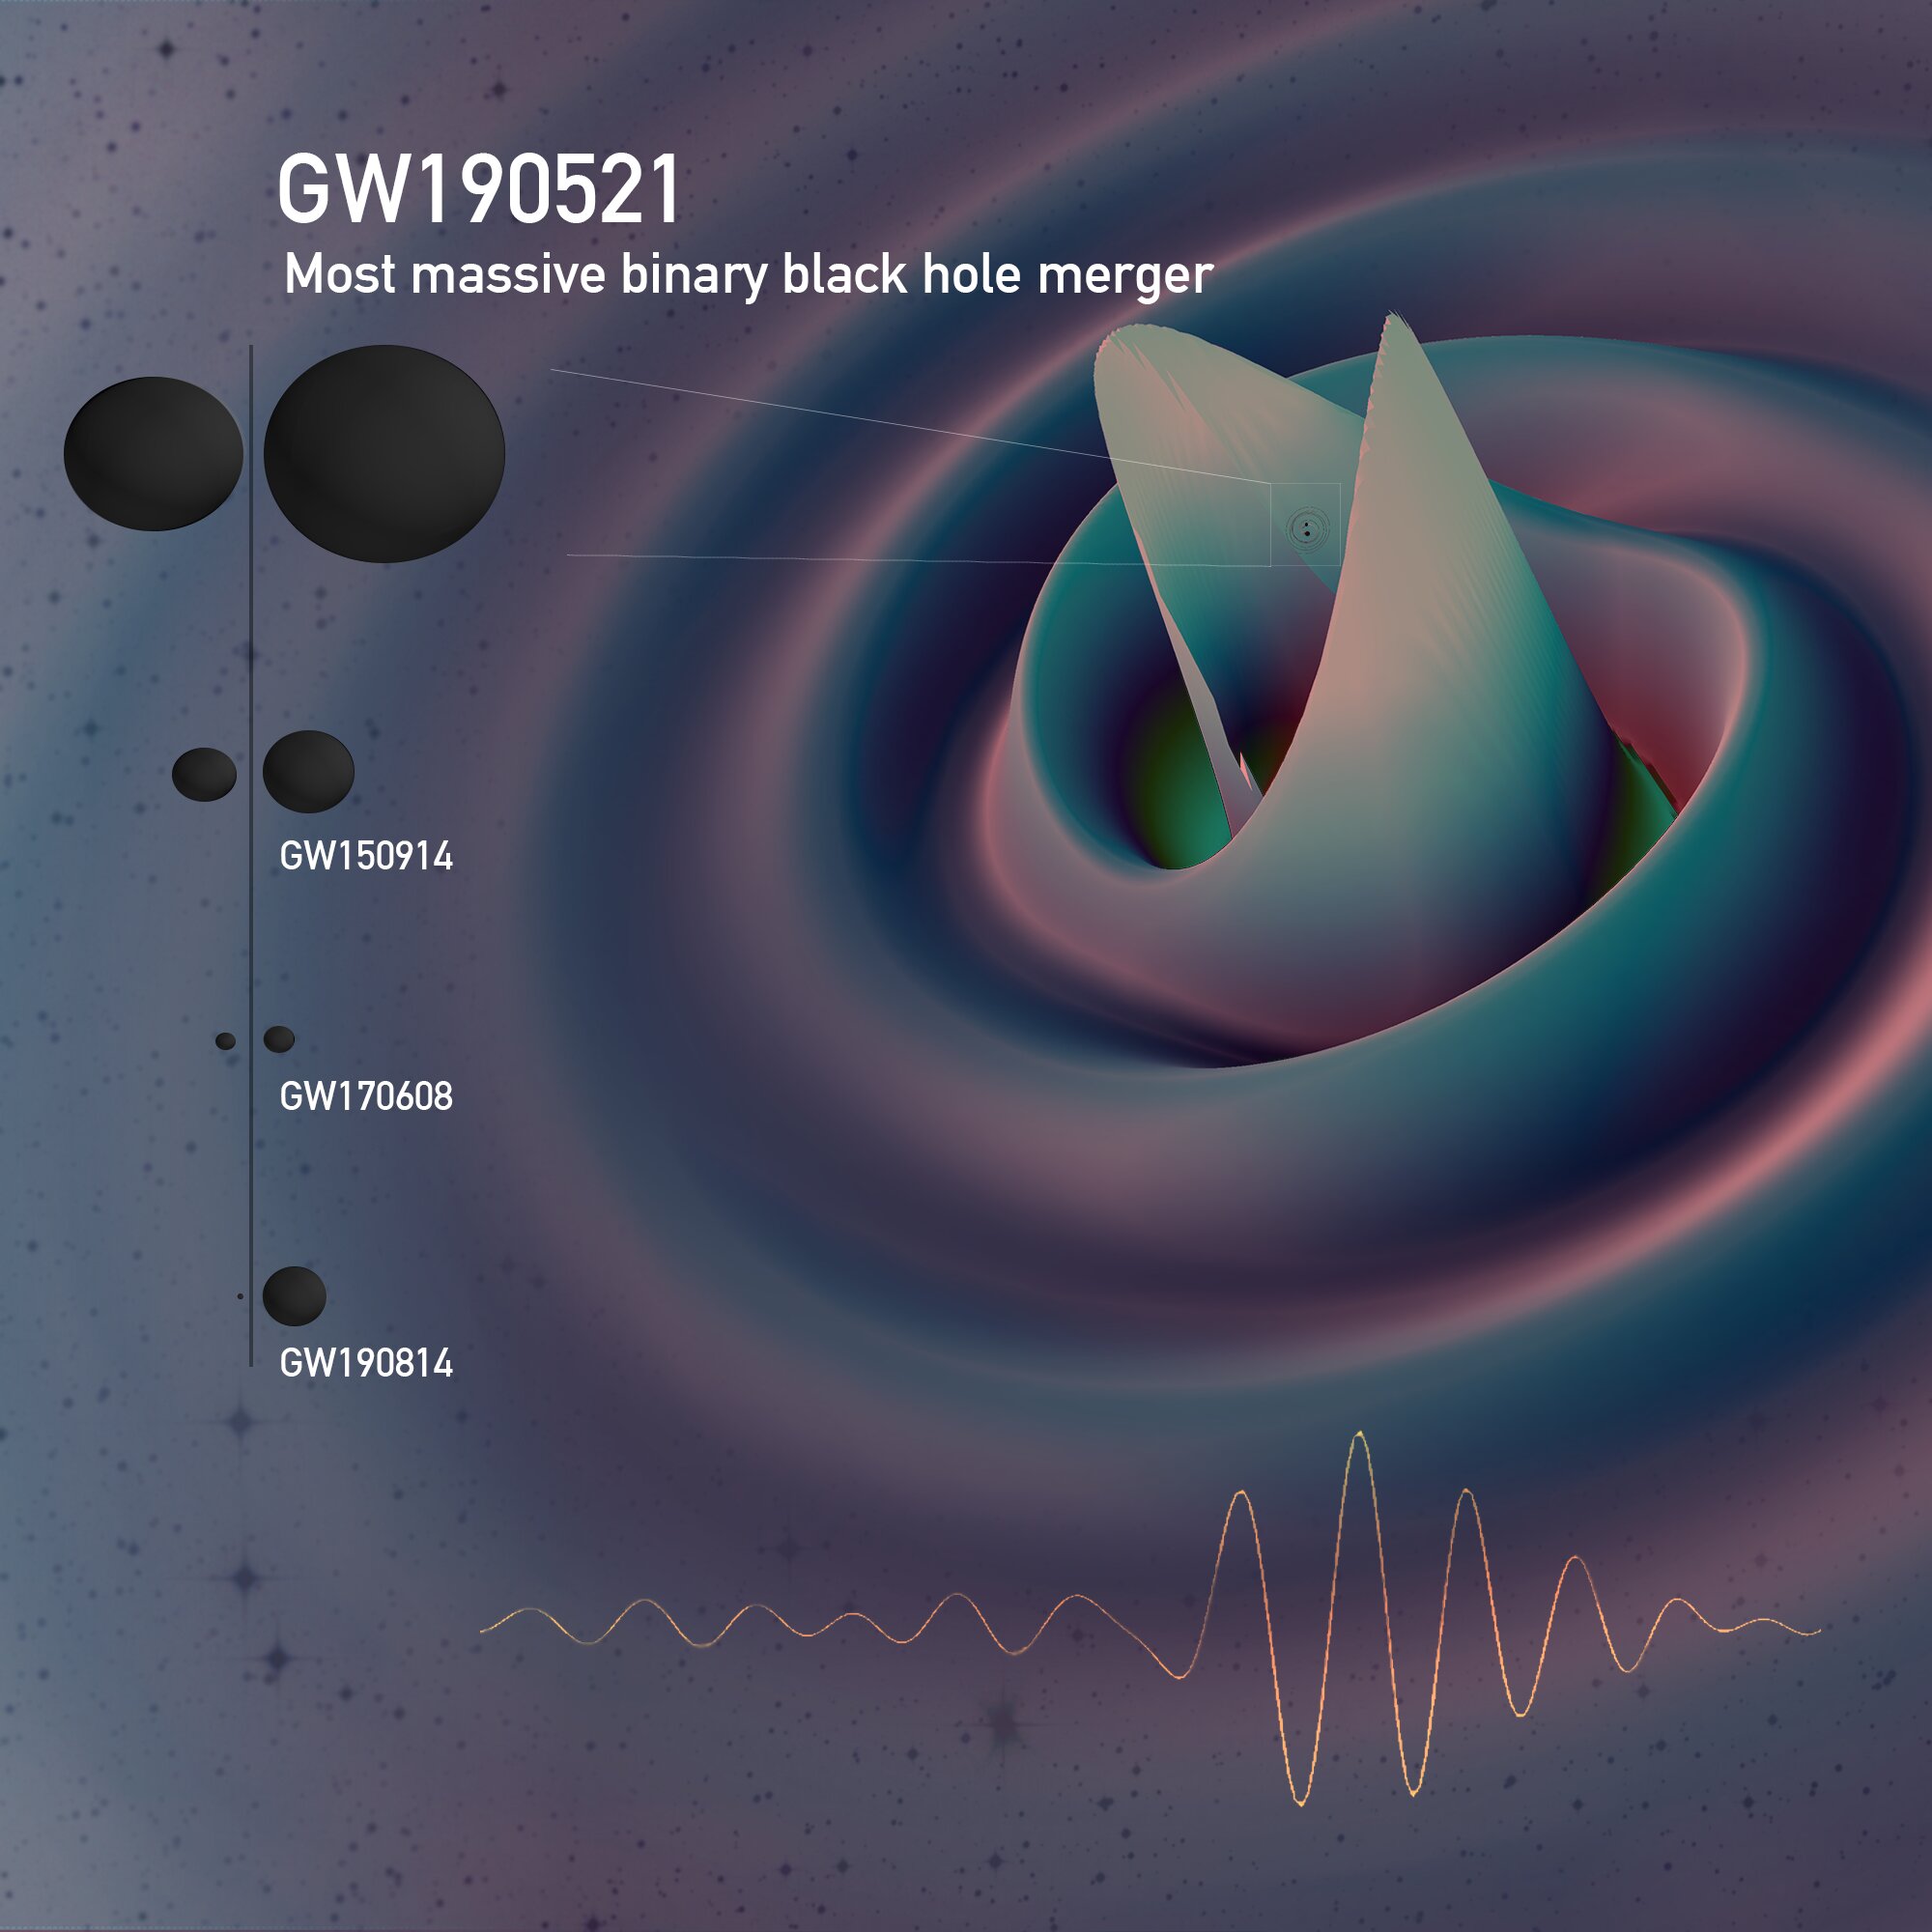 Study shows that the GW190521 event can be explained by primordial black holes